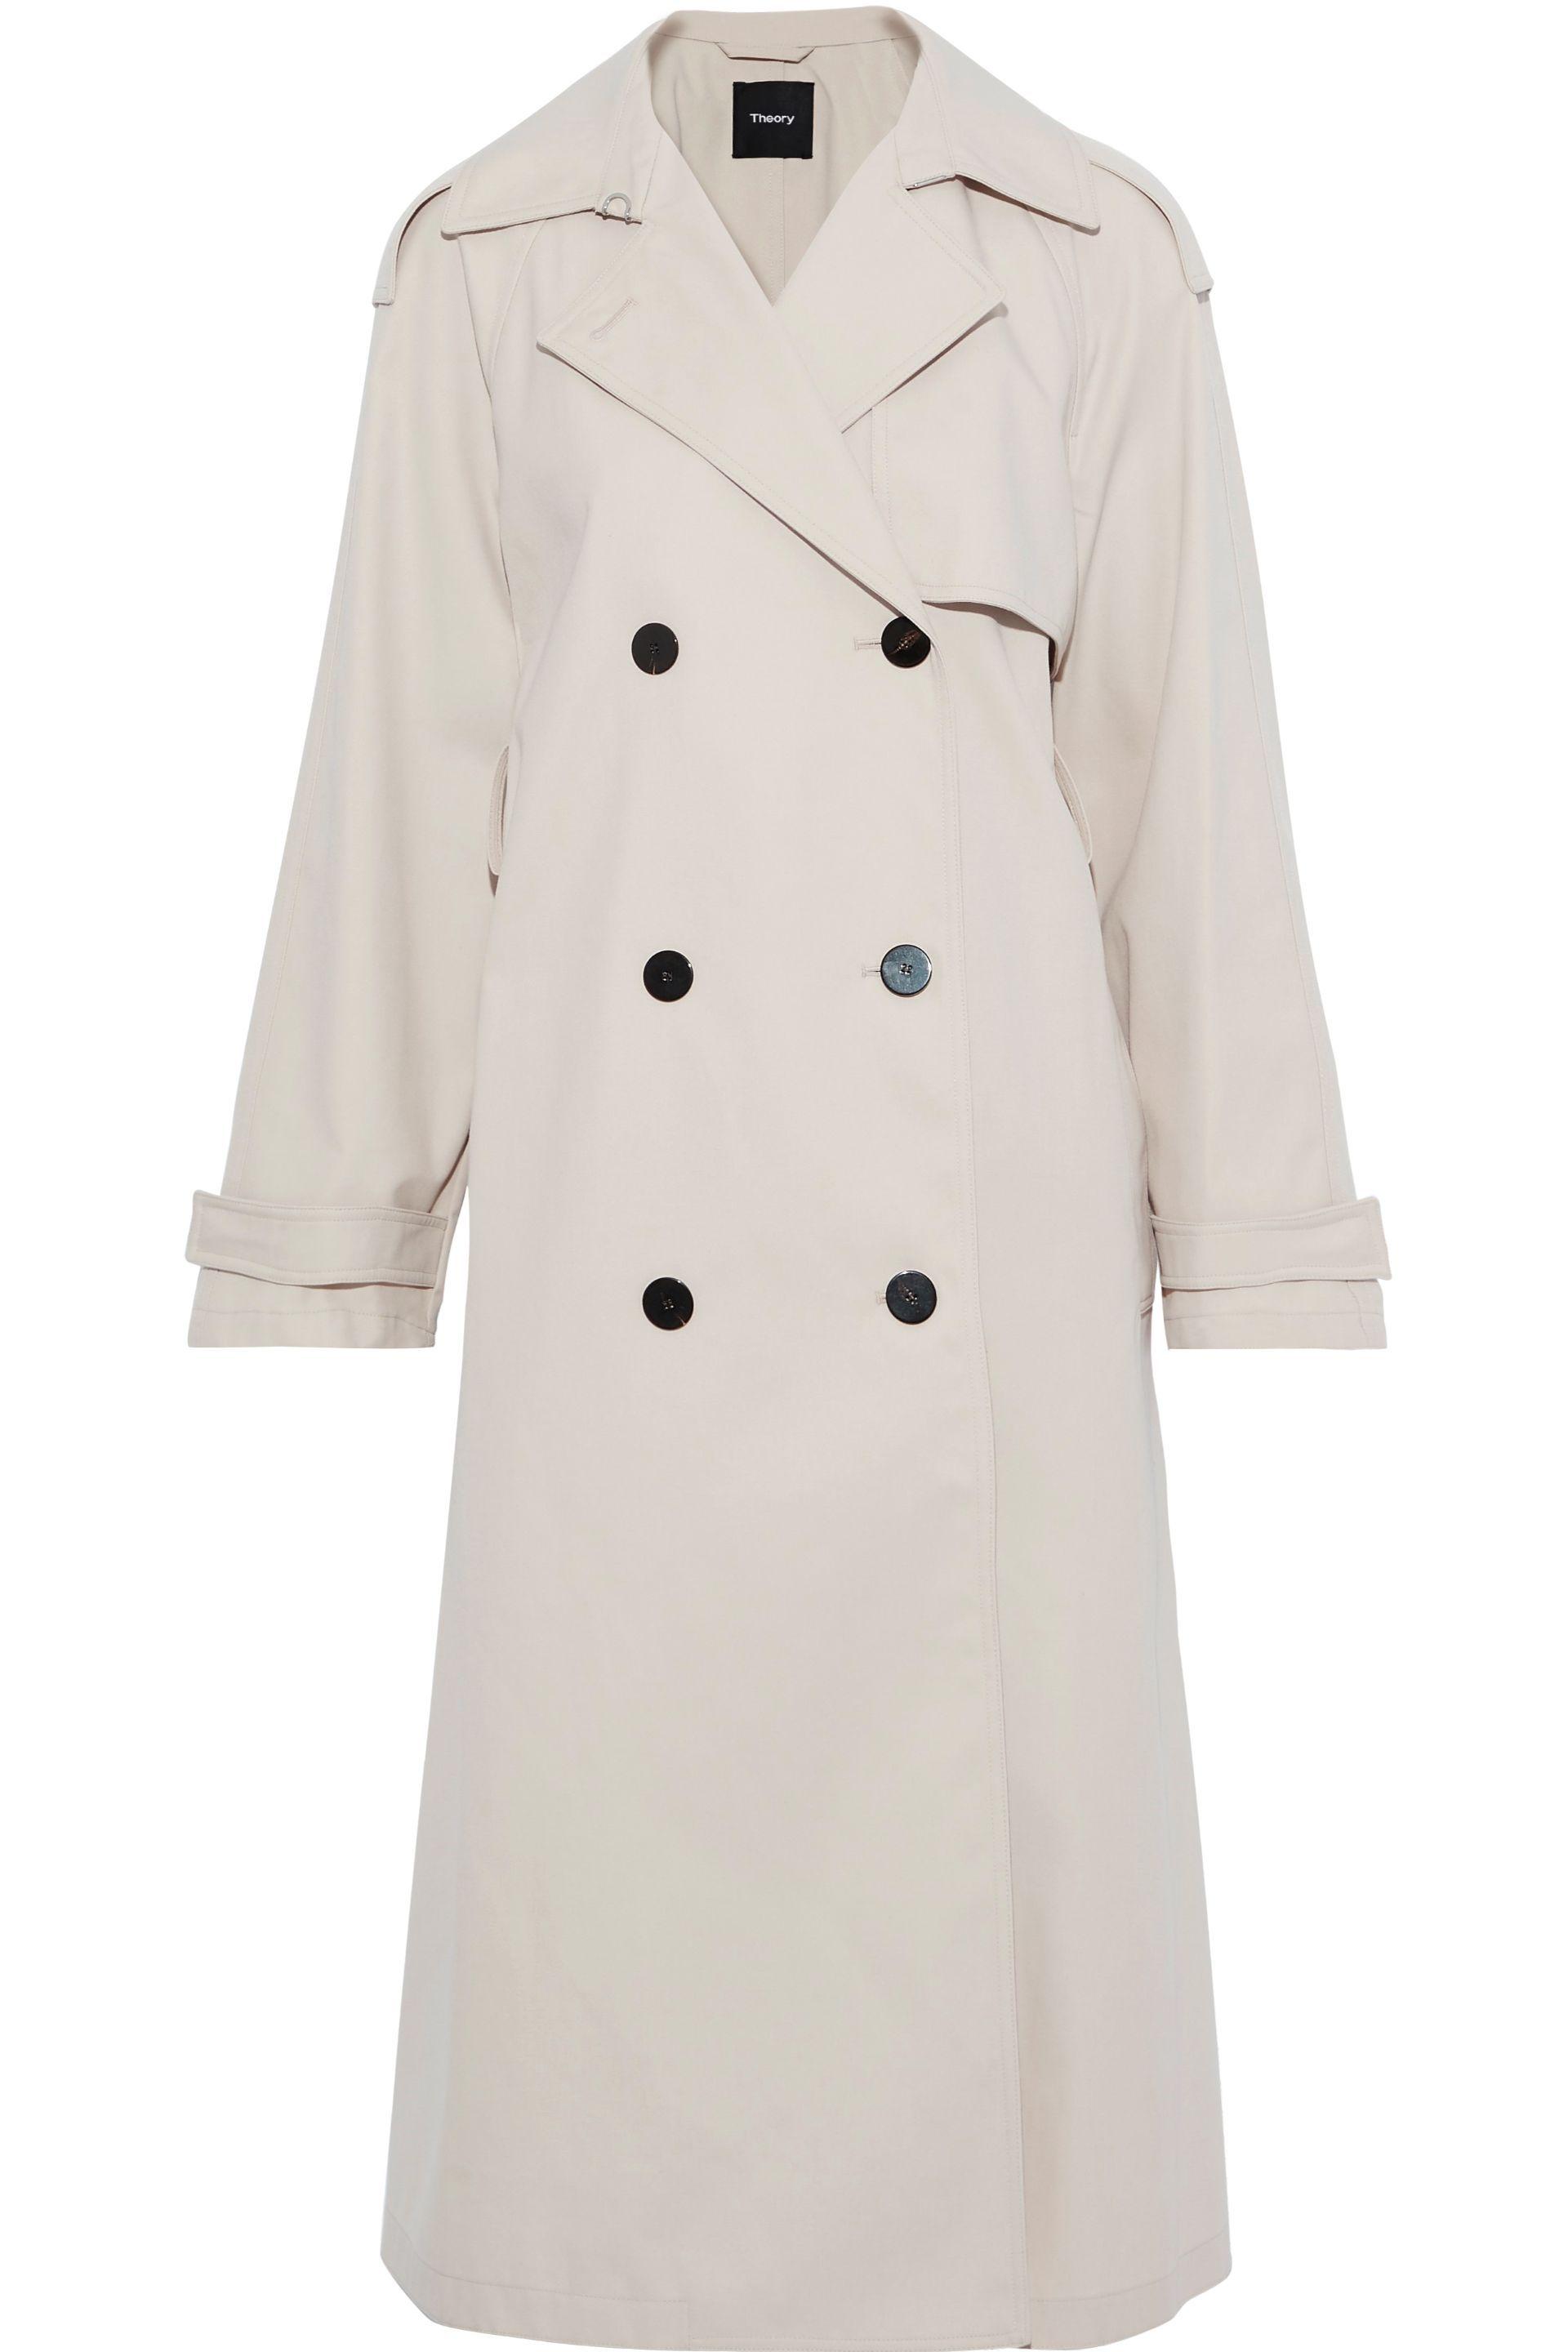 Theory Synthetic Gabardine Trench Coat Ivory in White - Lyst